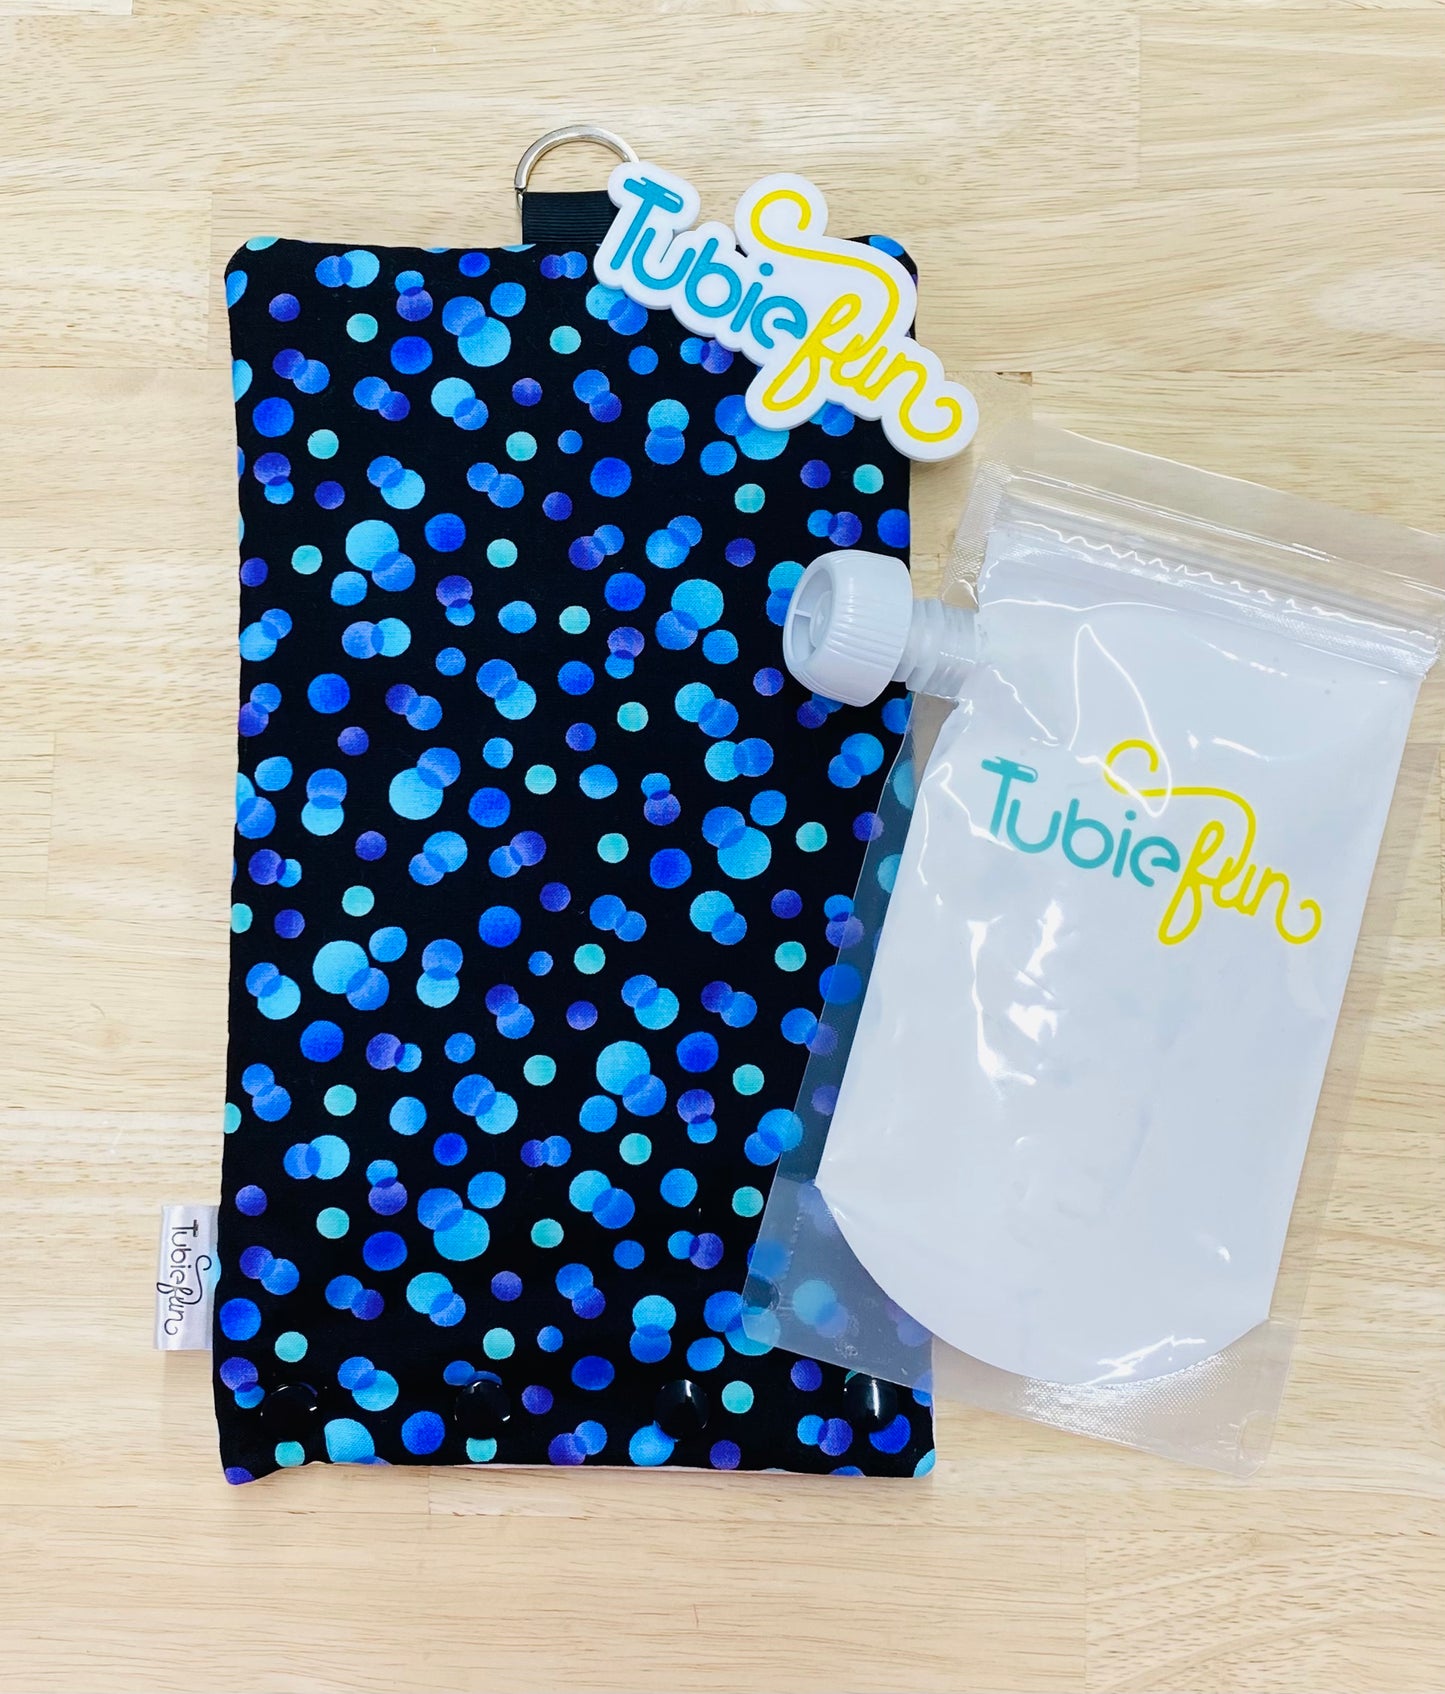 NEW Insulated Milk Bag Suitable for Tubie Fun 500ml Reusable Pouches - Blue and Purple Dots on Black